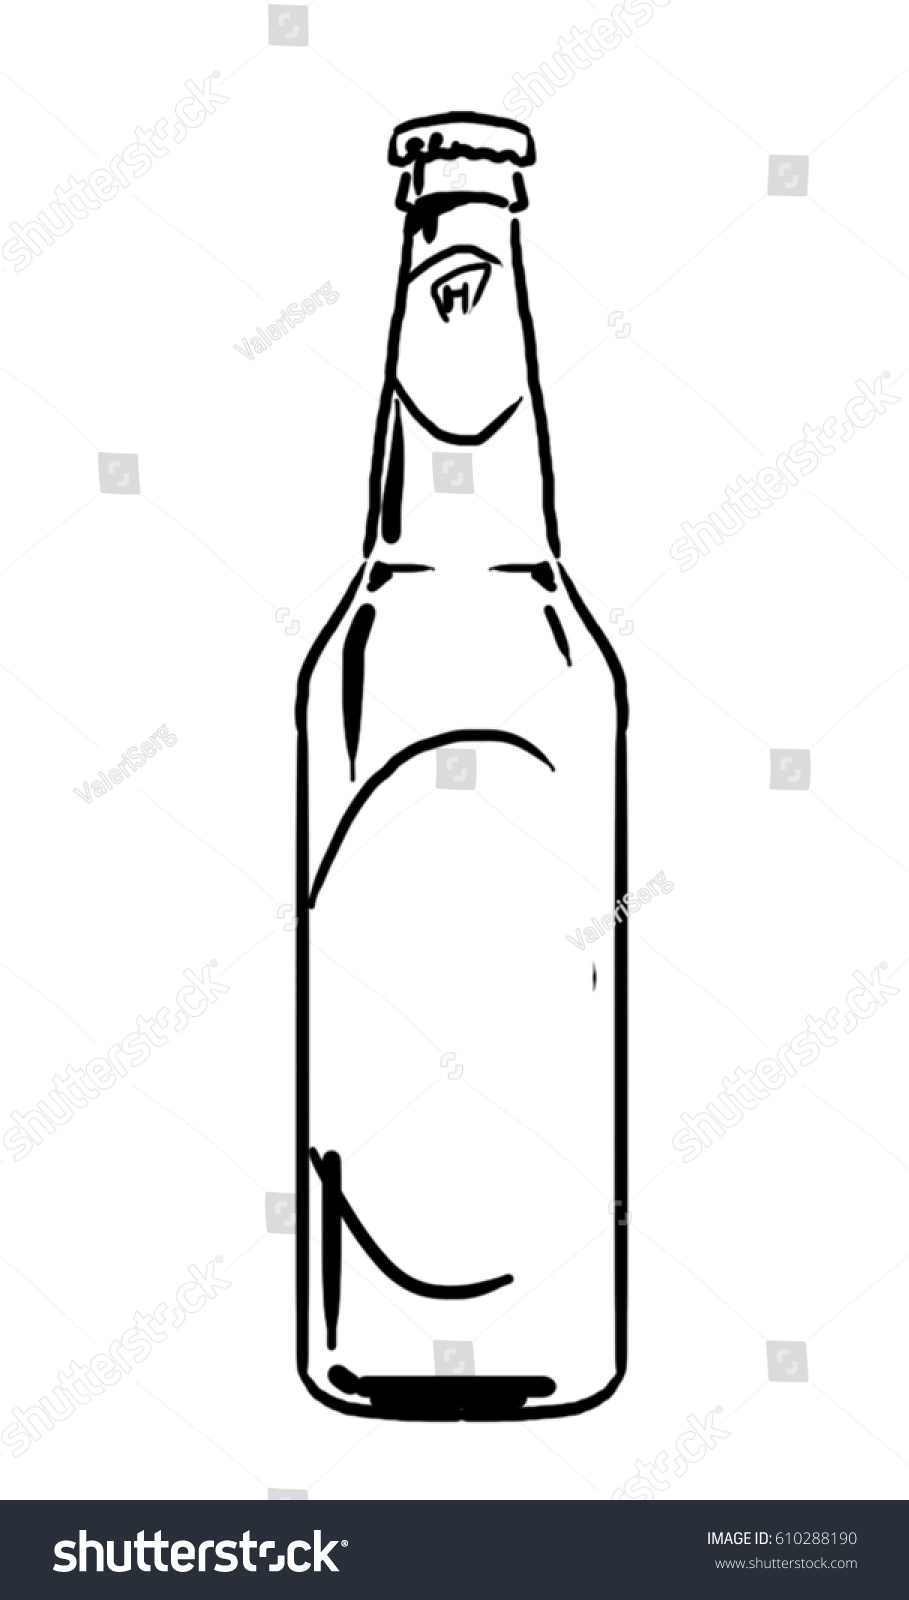 Unique How To Draw A Beer Bottle Easy Step By Step